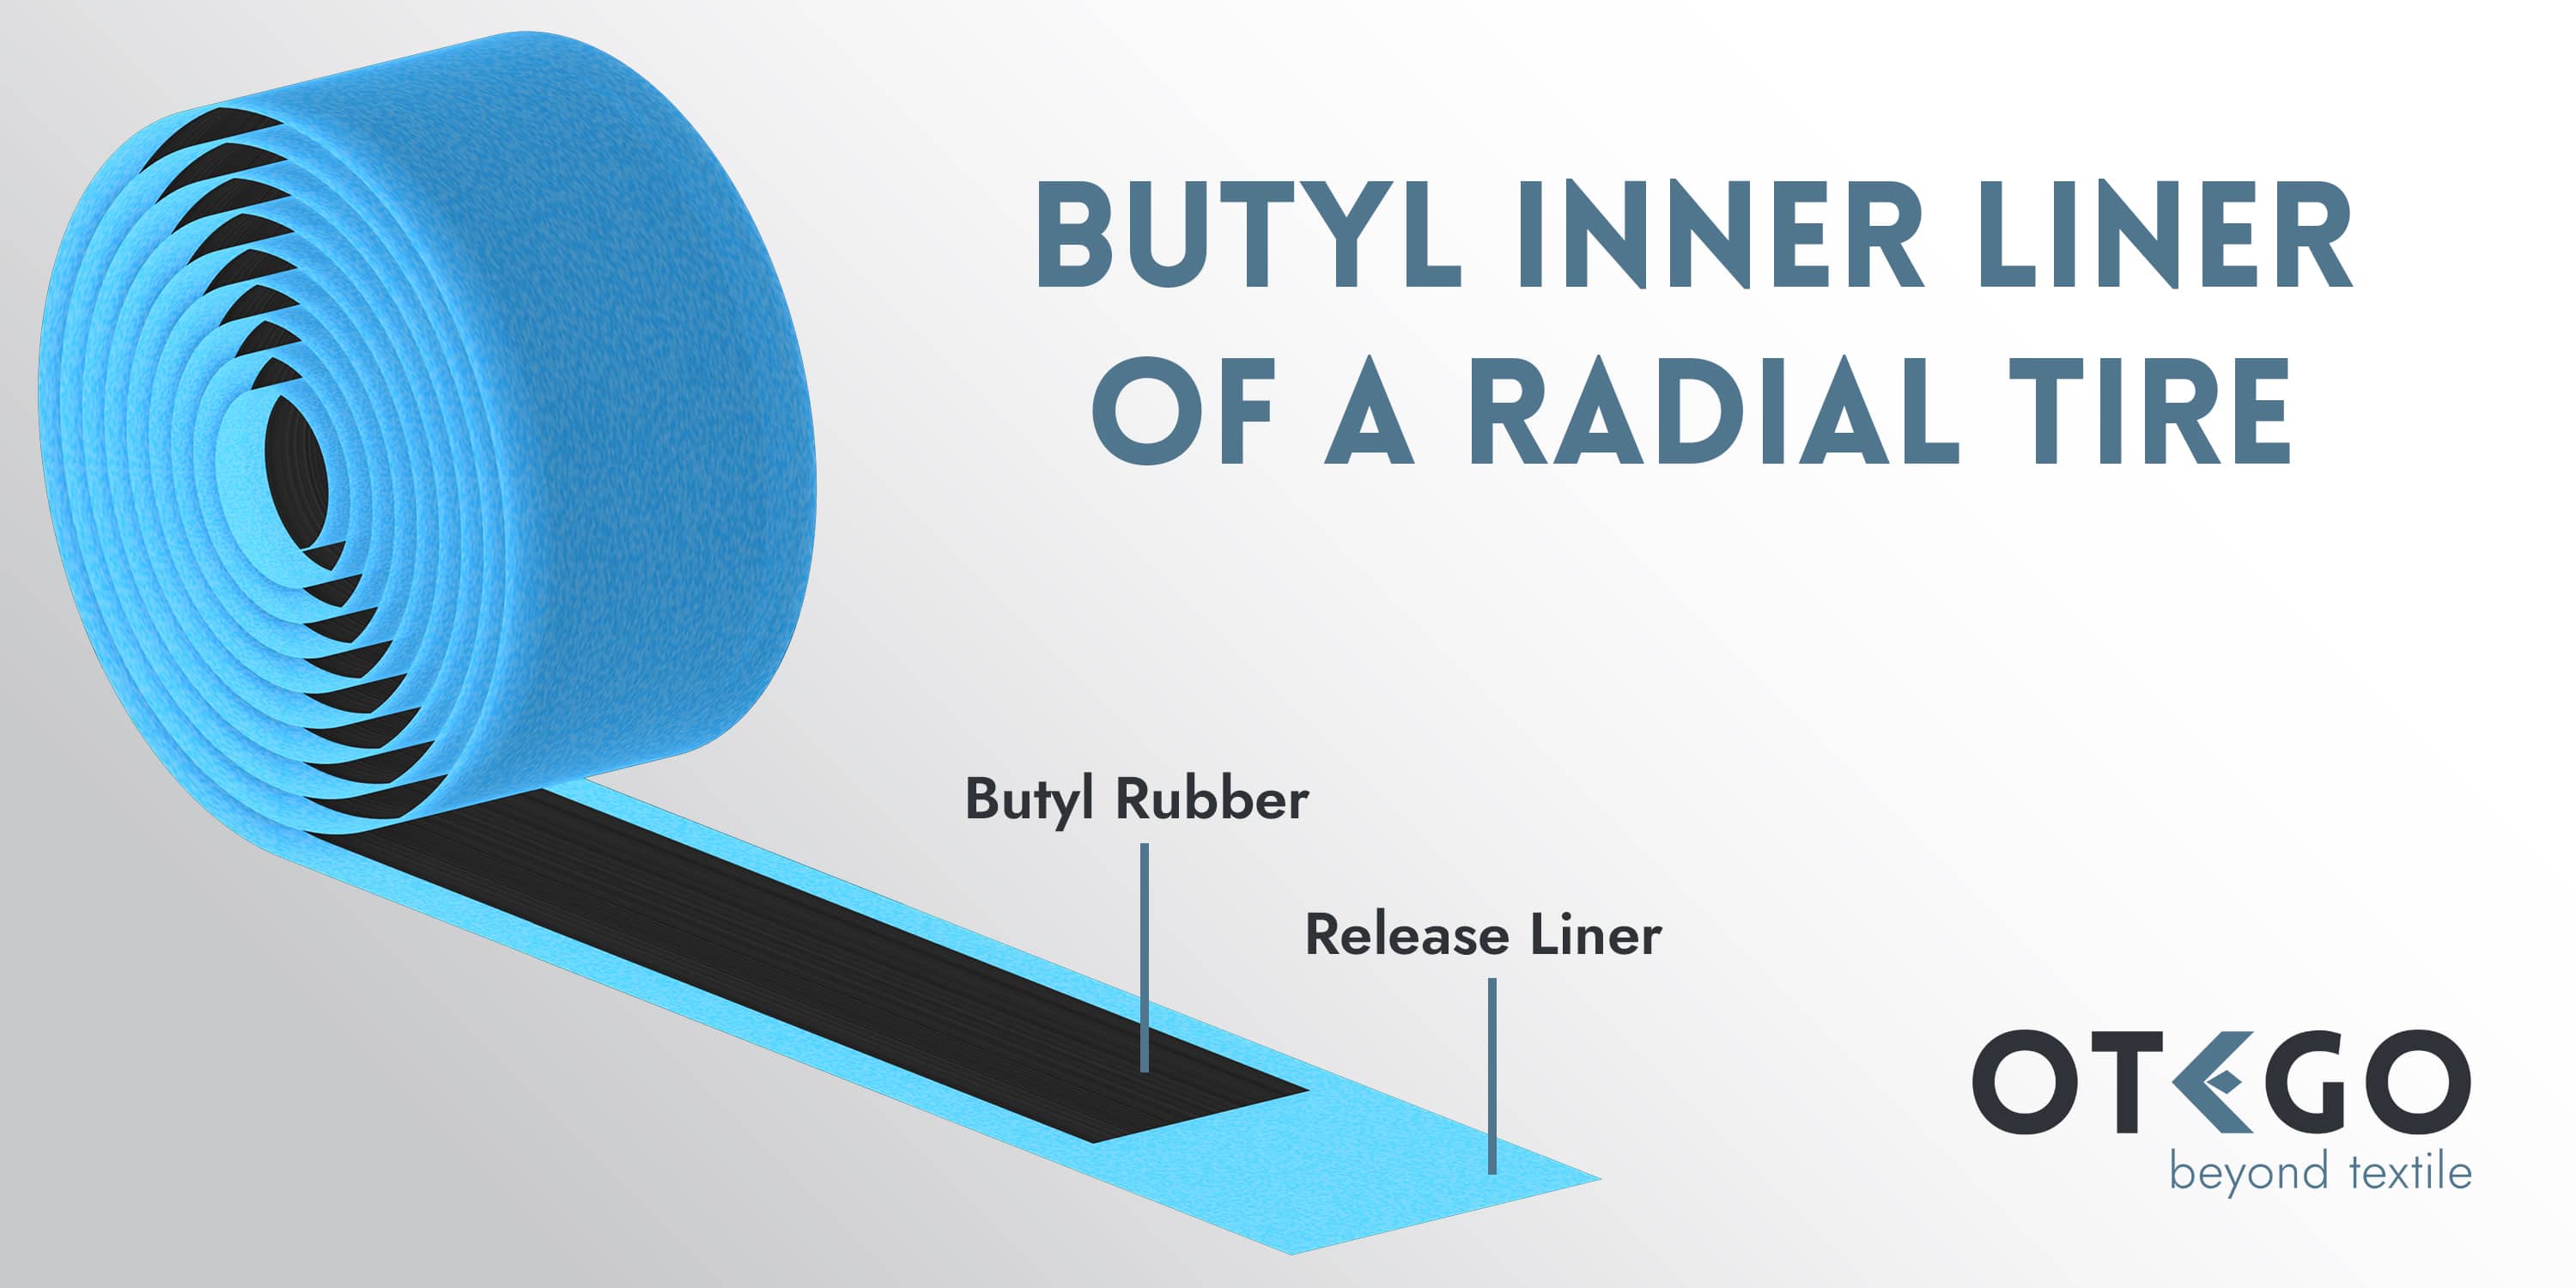 The Butyl Inner Liner Of A Radial Tyre